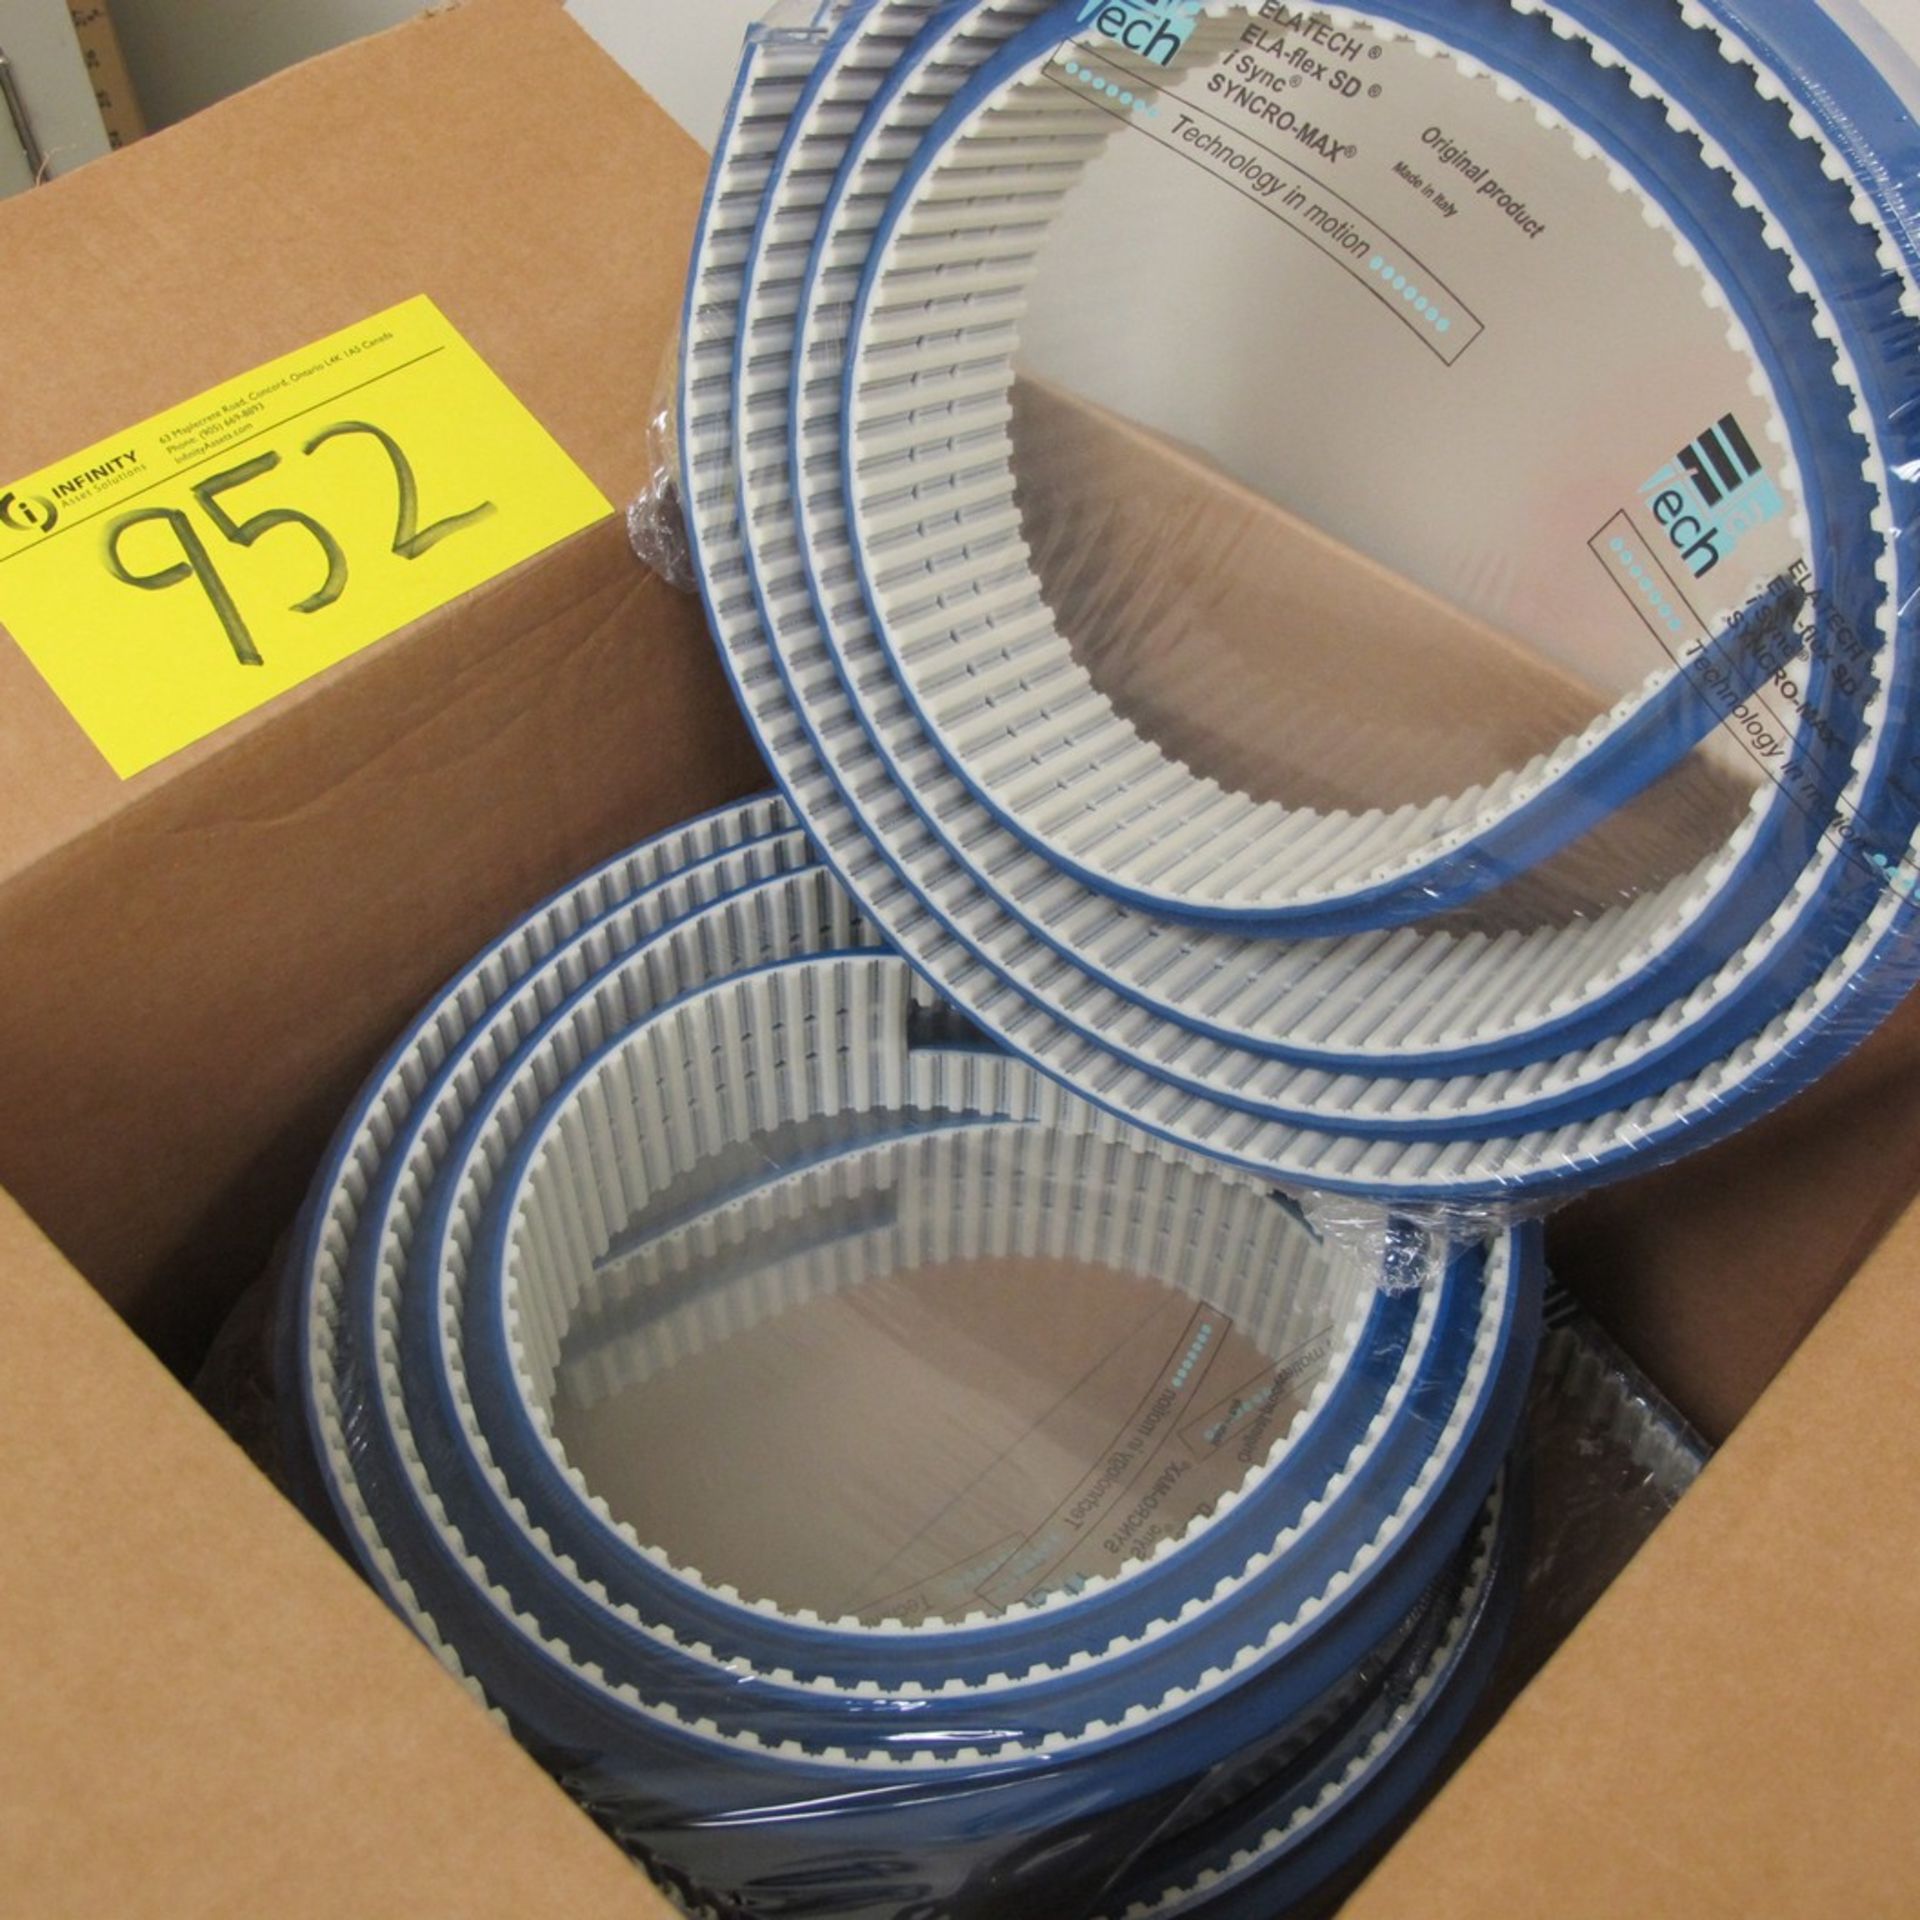 LOT OF (3) ECH BELTS (2ND FLOOR NORTH OFFICES)